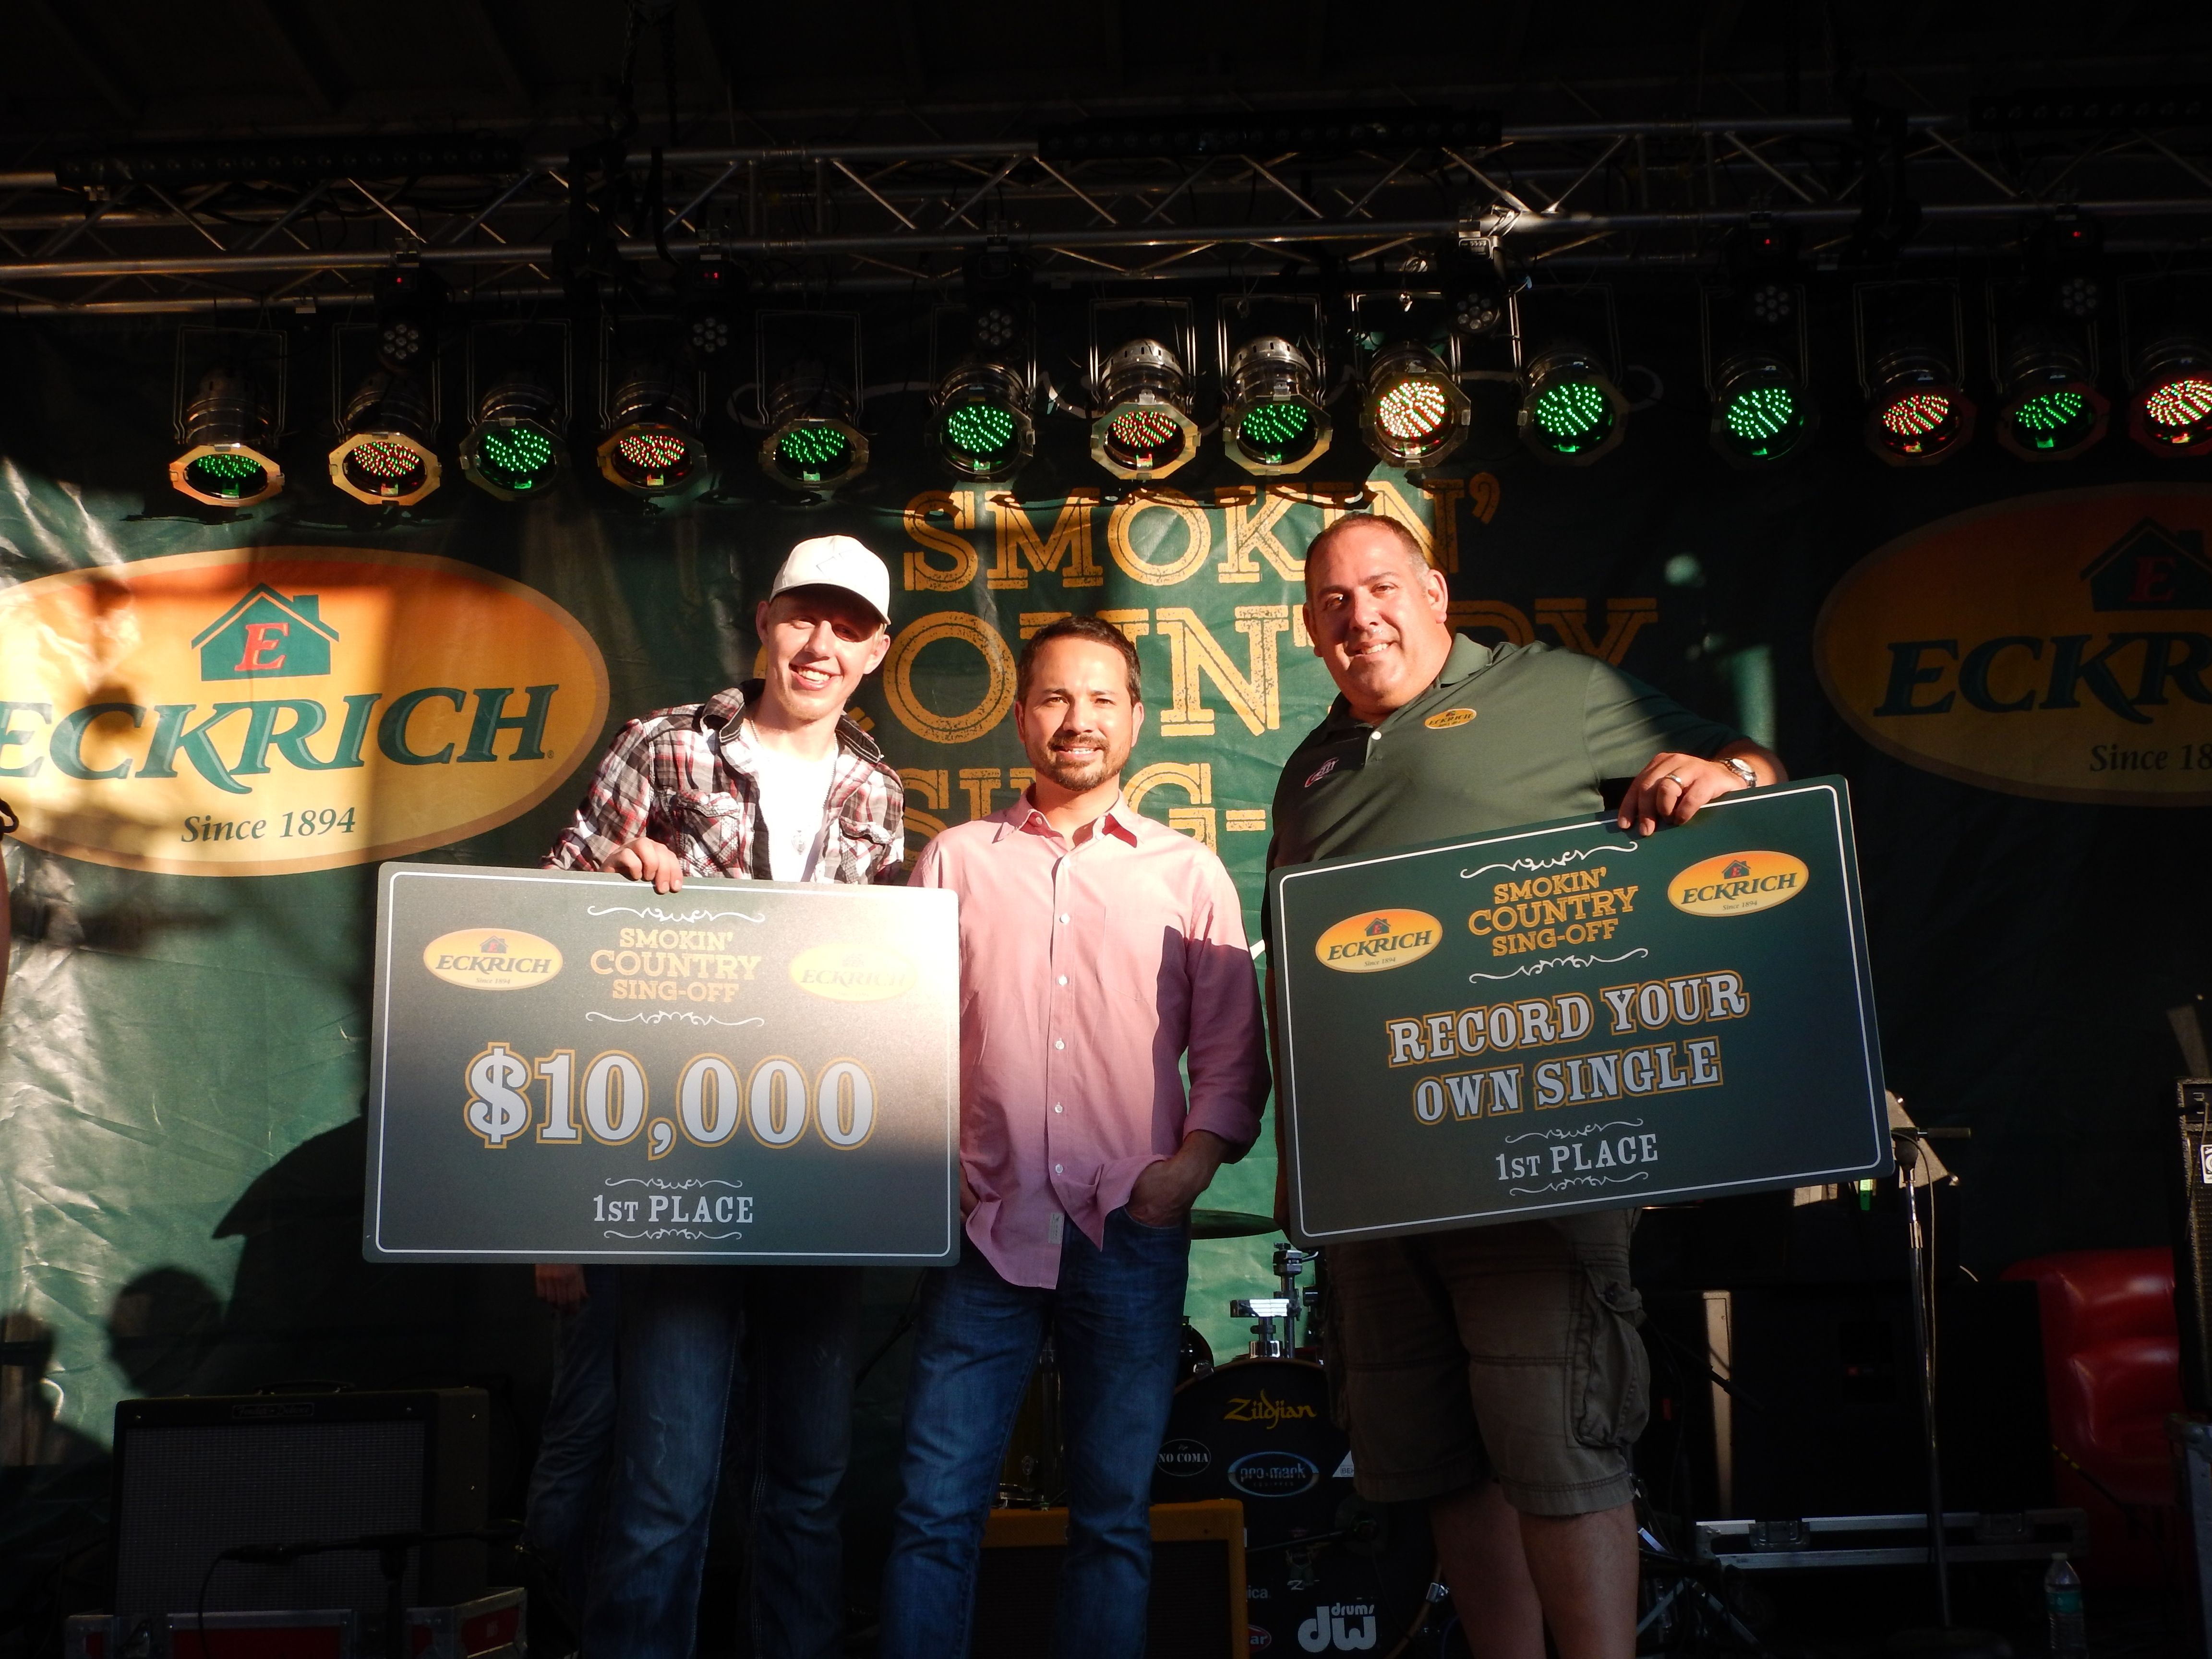 Eckrich Announces Winner of "Smokin' Country Sing-Off"